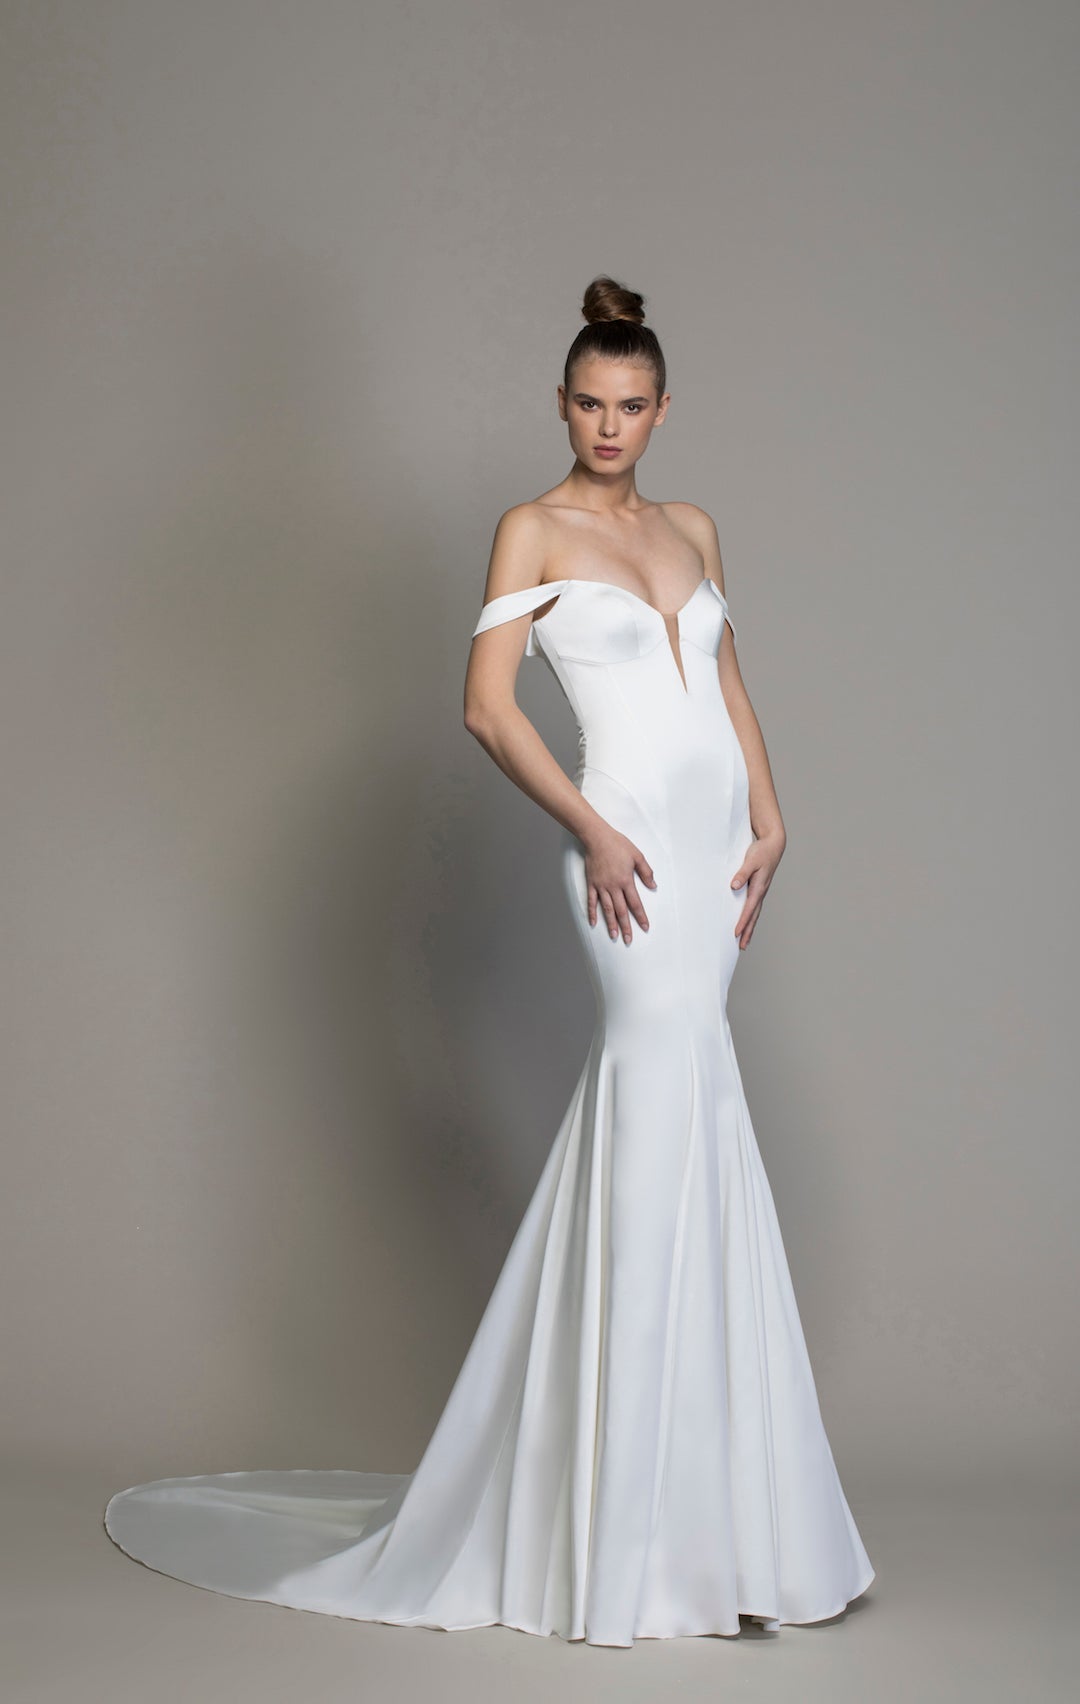 Pnina Tornai's new LOVE 2020 Collection is out! This is style 14778